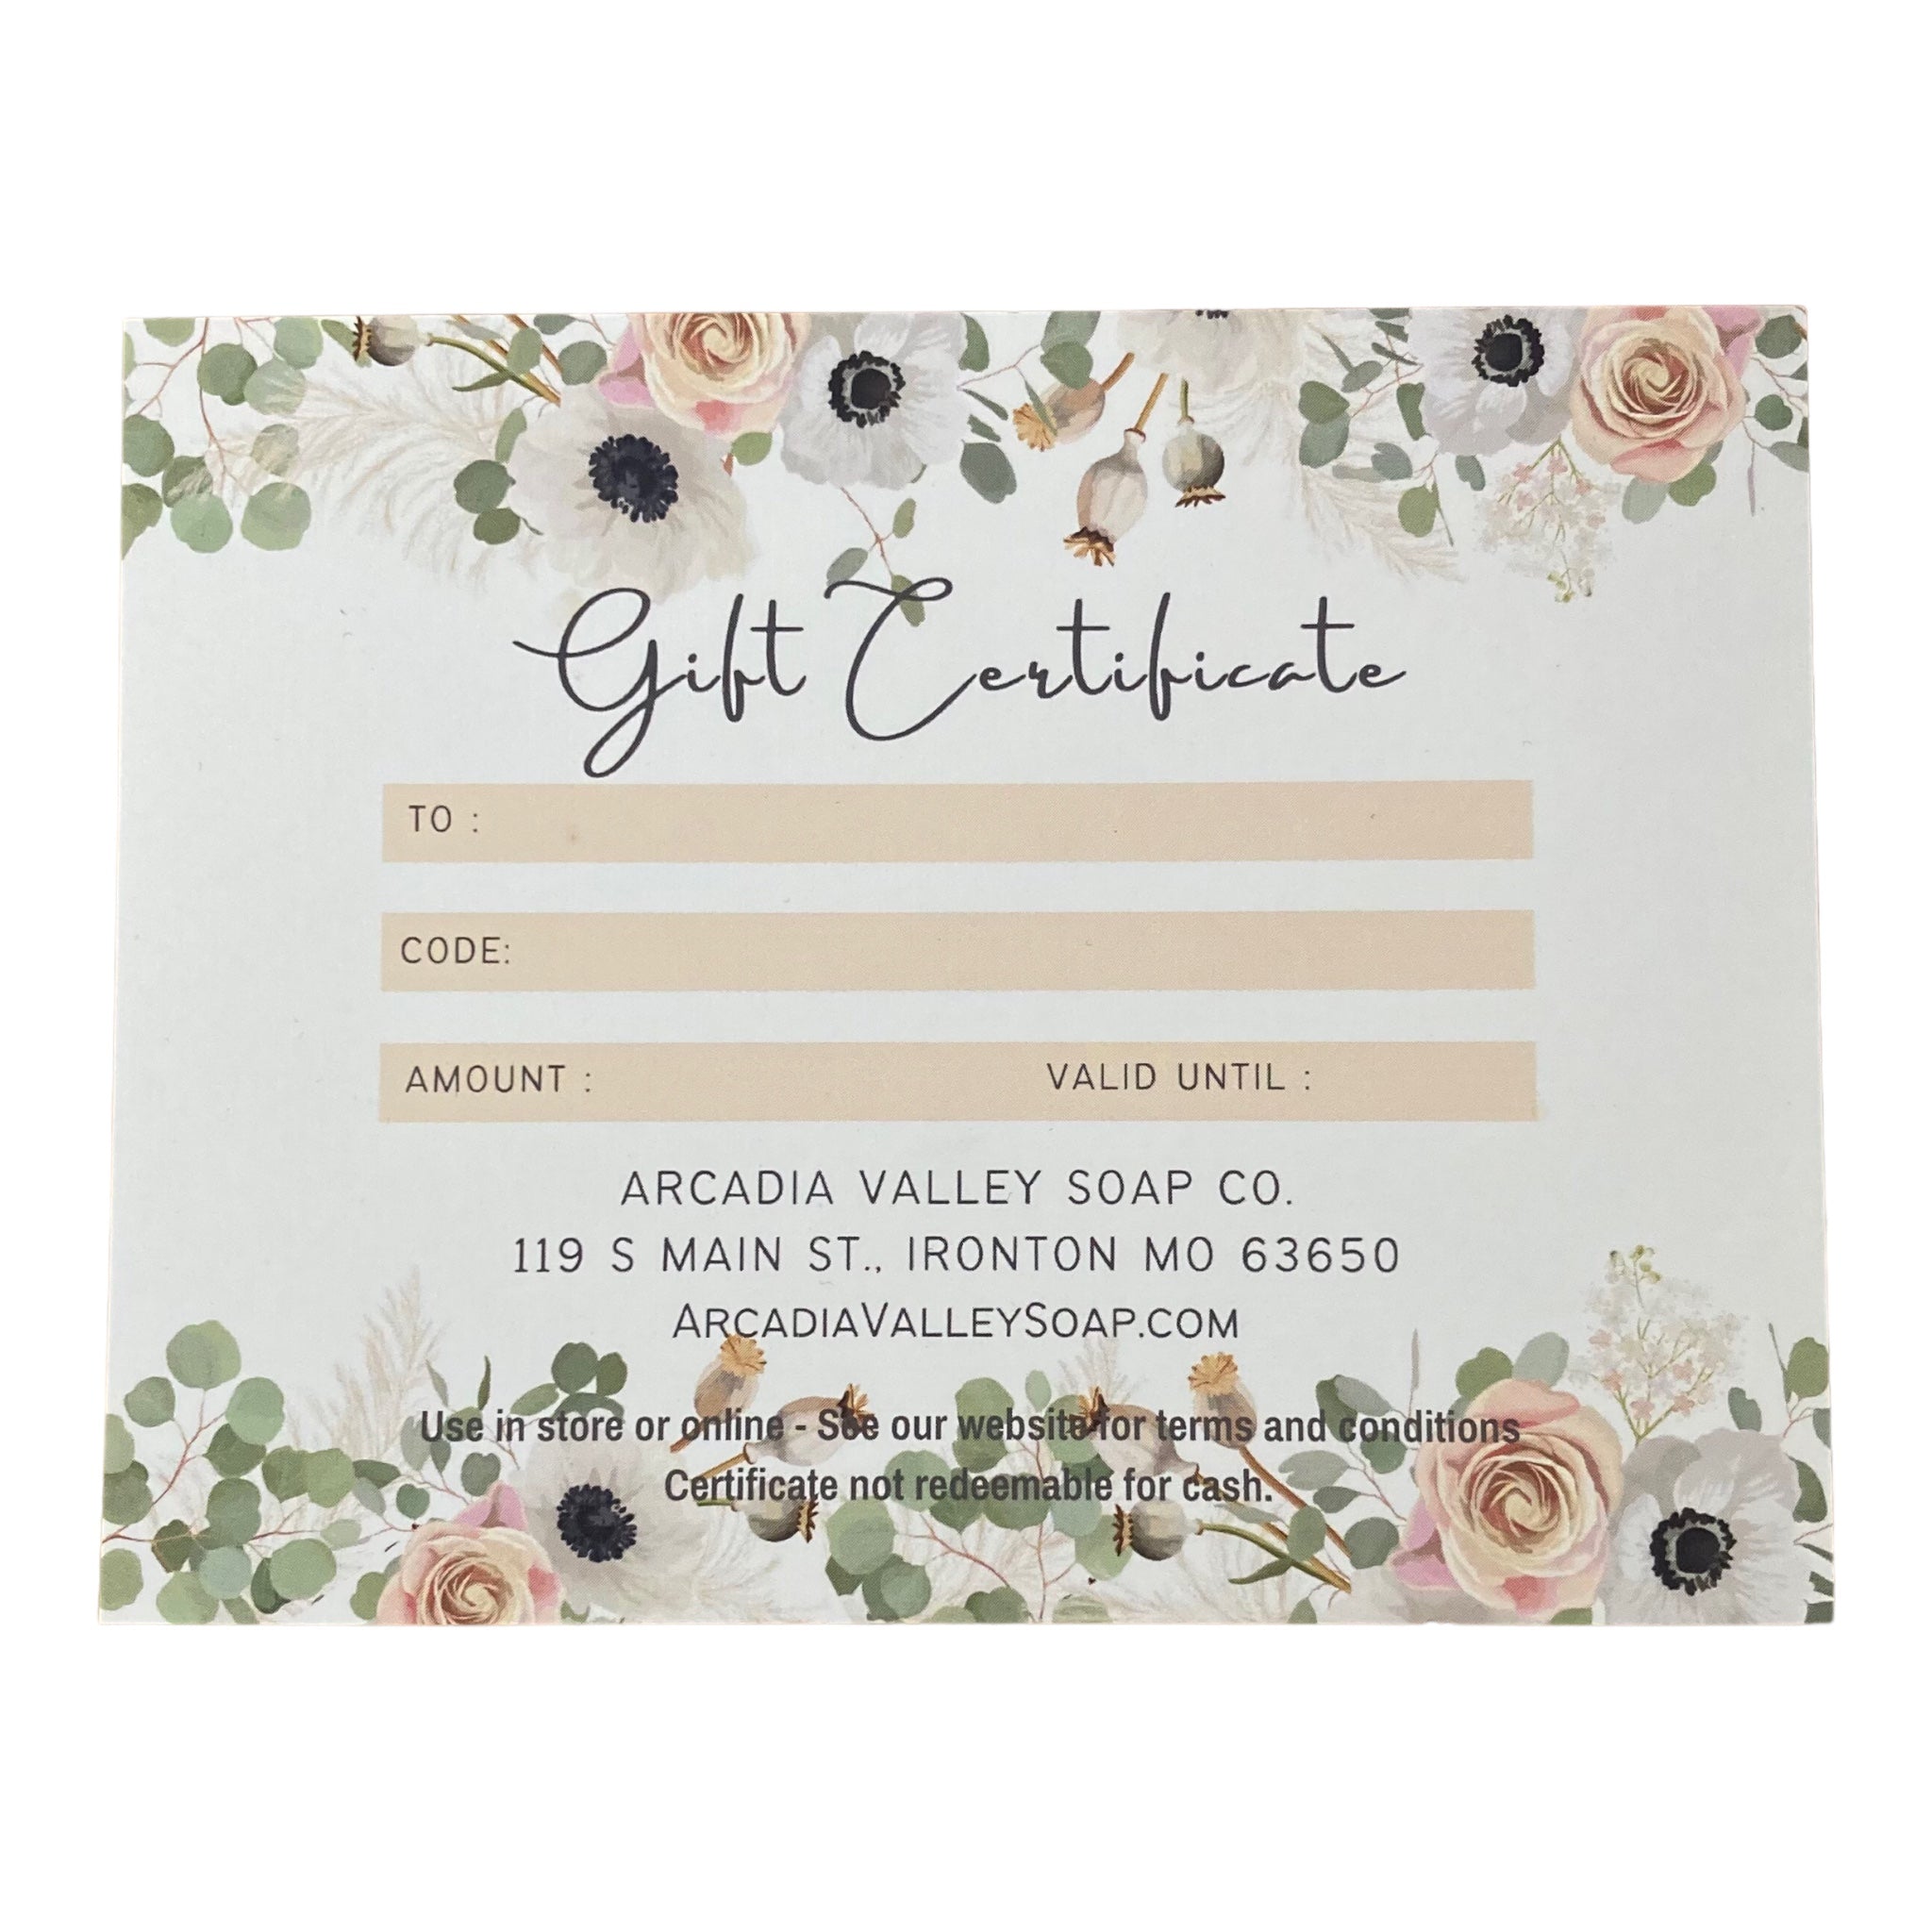 Arcadia Valley Soap Co. Gift Card